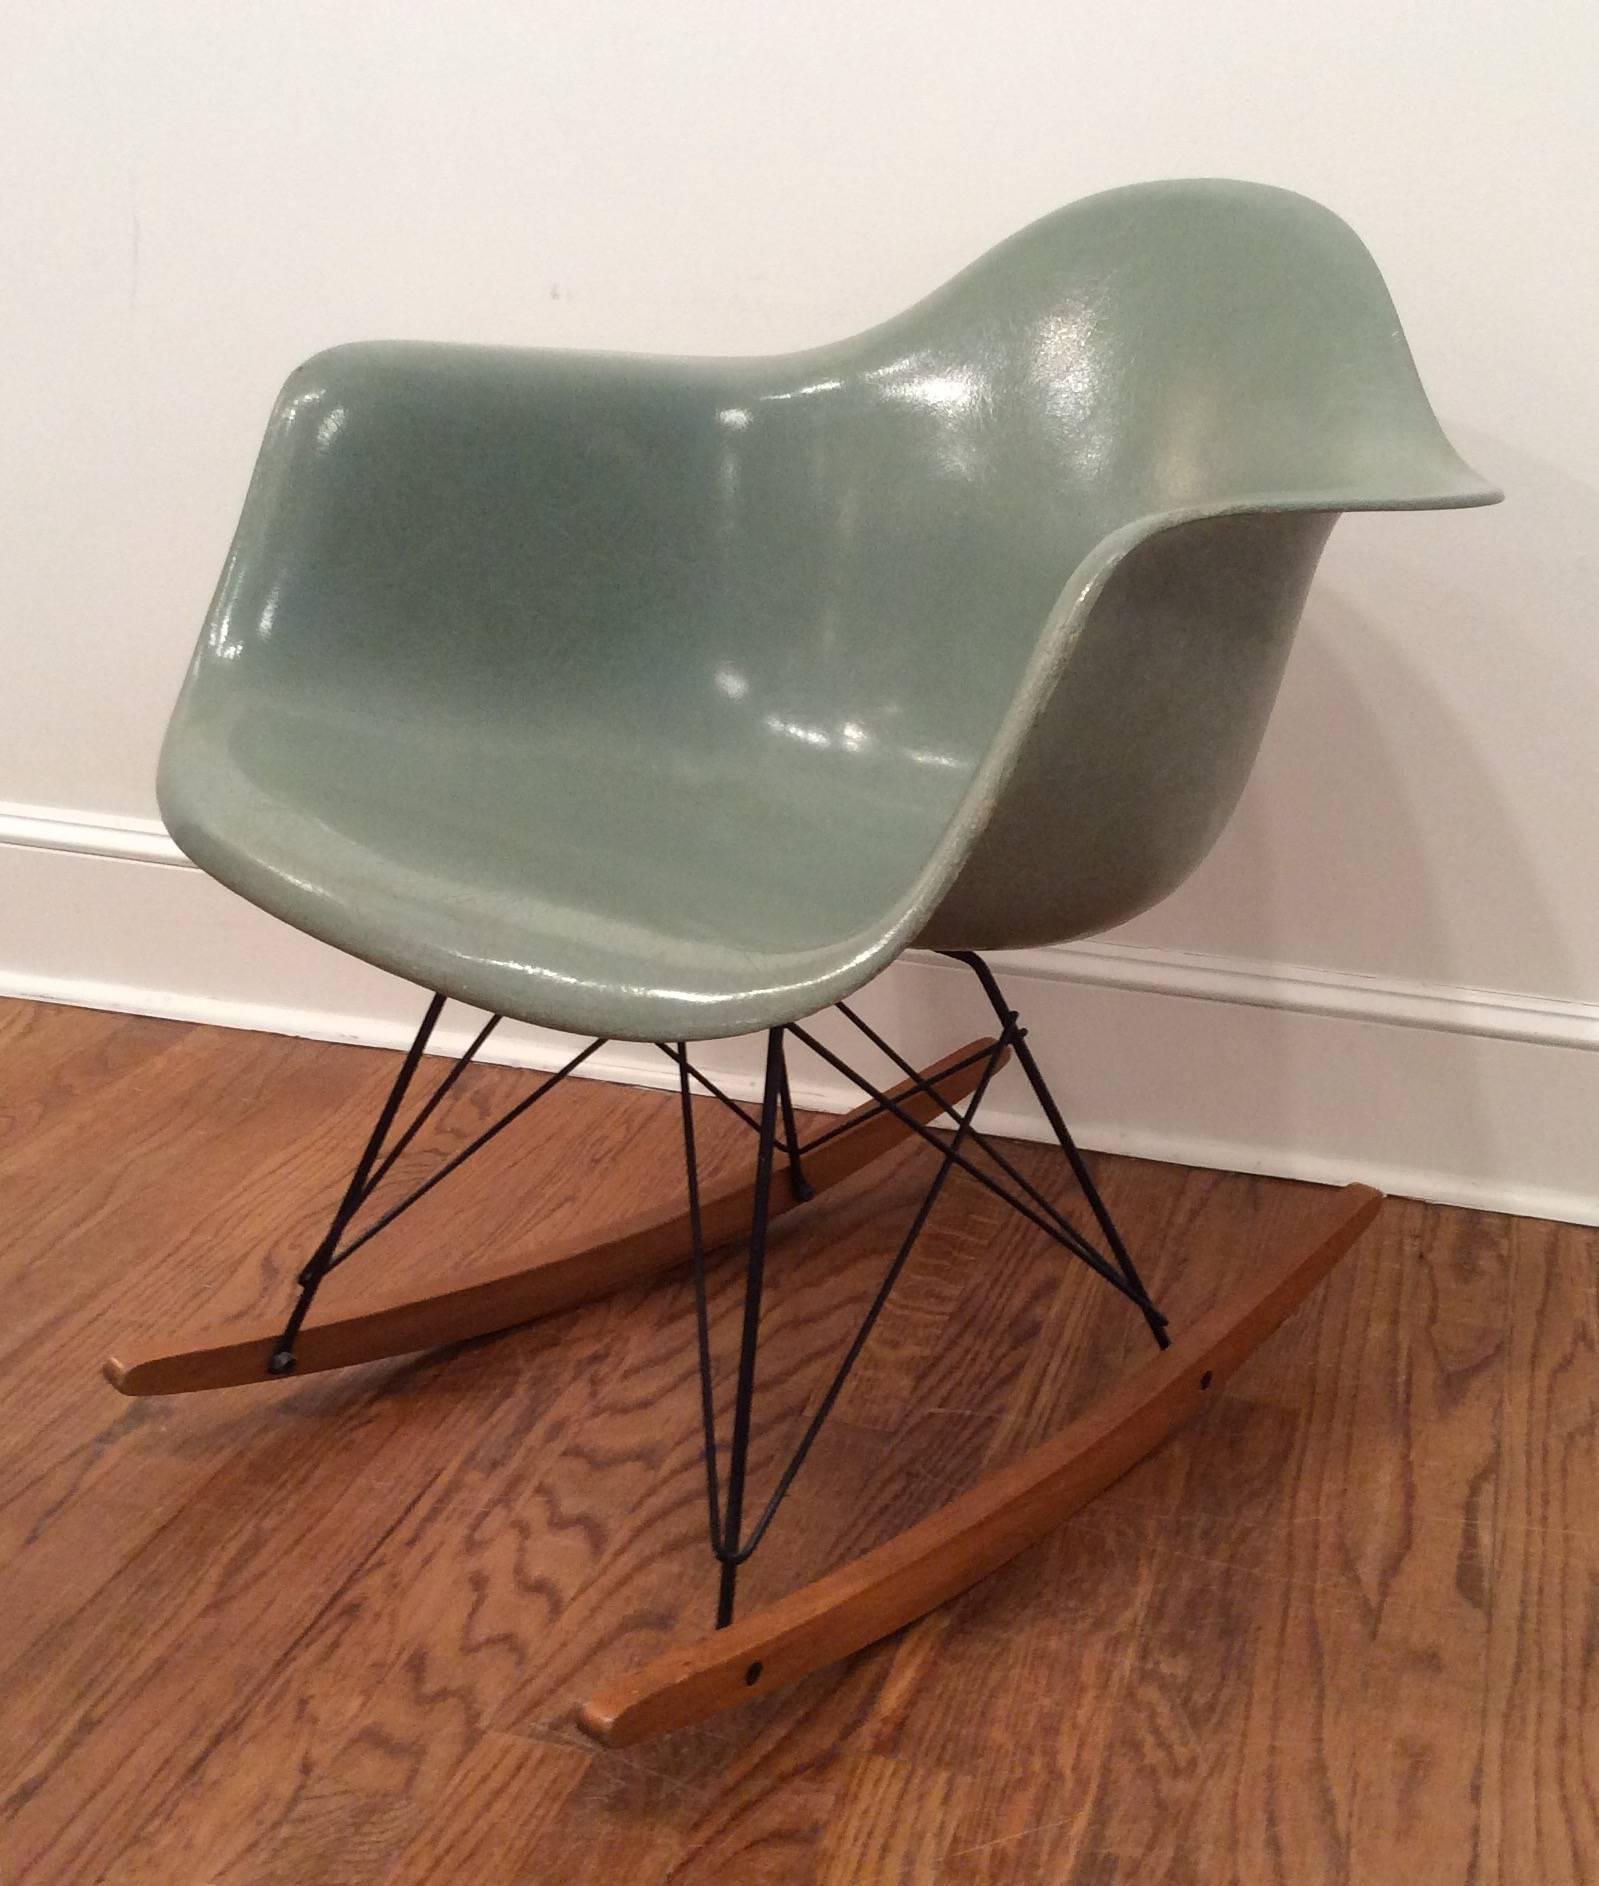 1950s sea foam green color, Charles and Ray Eames for Herman Miller RAR rocking chair. No fading or
cracks. Eiffel tower base, original blonde wood rockers. Bears original labels as shown. Great patina throughout.